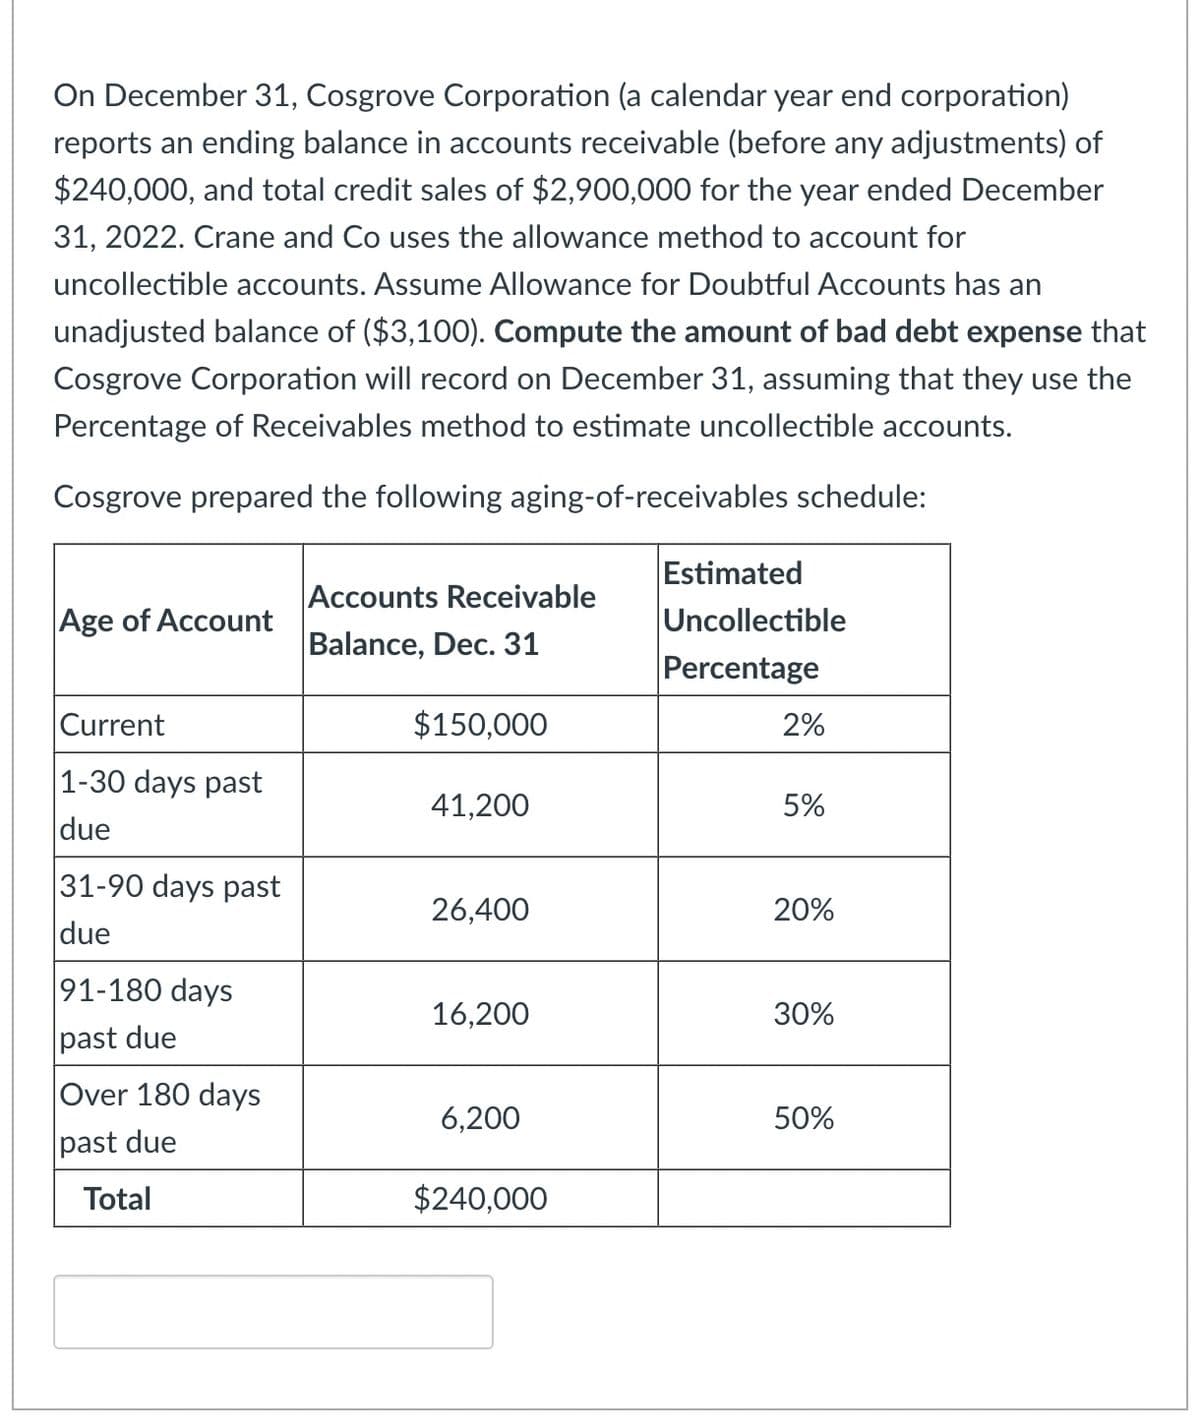 On December 31, Cosgrove Corporation (a calendar year end corporation)
reports an ending balance in accounts receivable (before any adjustments) of
$240,000, and total credit sales of $2,900,000 for the year ended December
31, 2022. Crane and Co uses the allowance method to account for
uncollectible accounts. Assume Allowance for Doubtful Accounts has an
unadjusted balance of ($3,100). Compute the amount of bad debt expense that
Cosgrove Corporation will record on December 31, assuming that they use the
Percentage of Receivables method to estimate uncollectible accounts.
Cosgrove prepared the following aging-of-receivables schedule:
Age of Account
Current
1-30 days past
due
31-90 days past
due
91-180 days
past due
Over 180 days
past due
Total
Accounts Receivable
Balance, Dec. 31
$150,000
41,200
26,400
16,200
6,200
$240,000
Estimated
Uncollectible
Percentage
2%
5%
20%
30%
50%